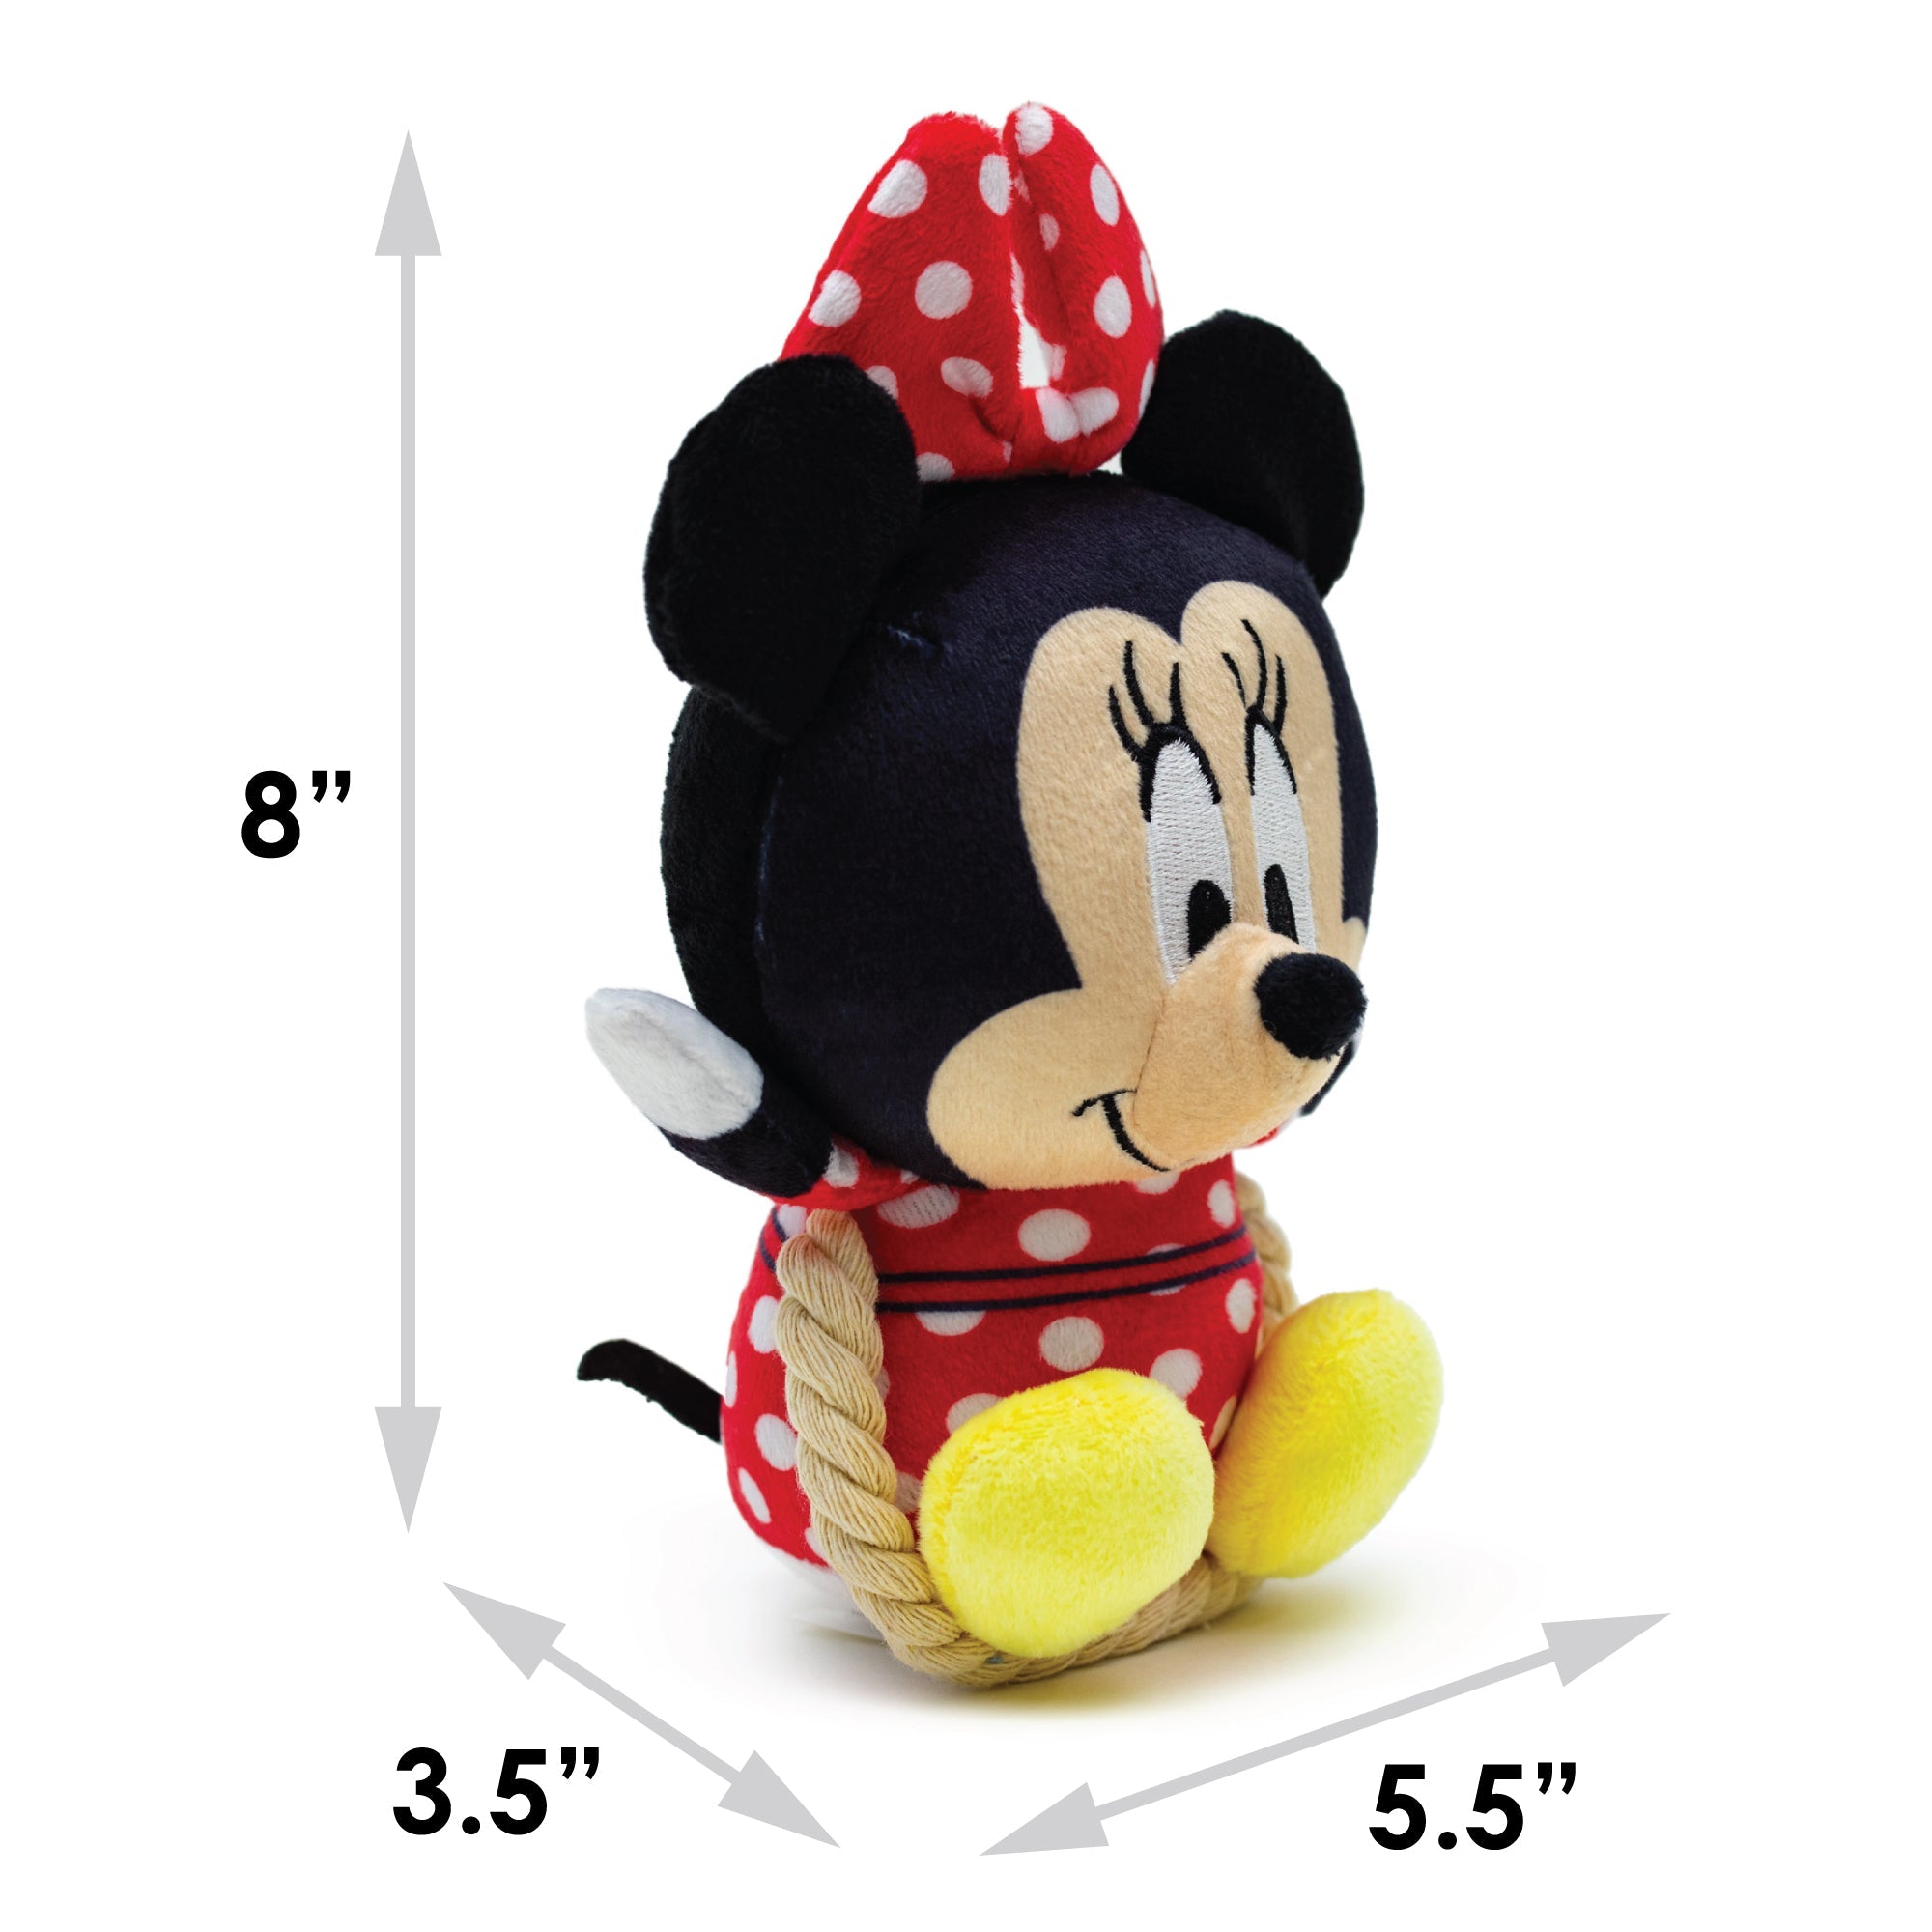 Dog Toy Squeaker Plush with Rope - Disney Minnie Mouse Chibi Sitting Pose